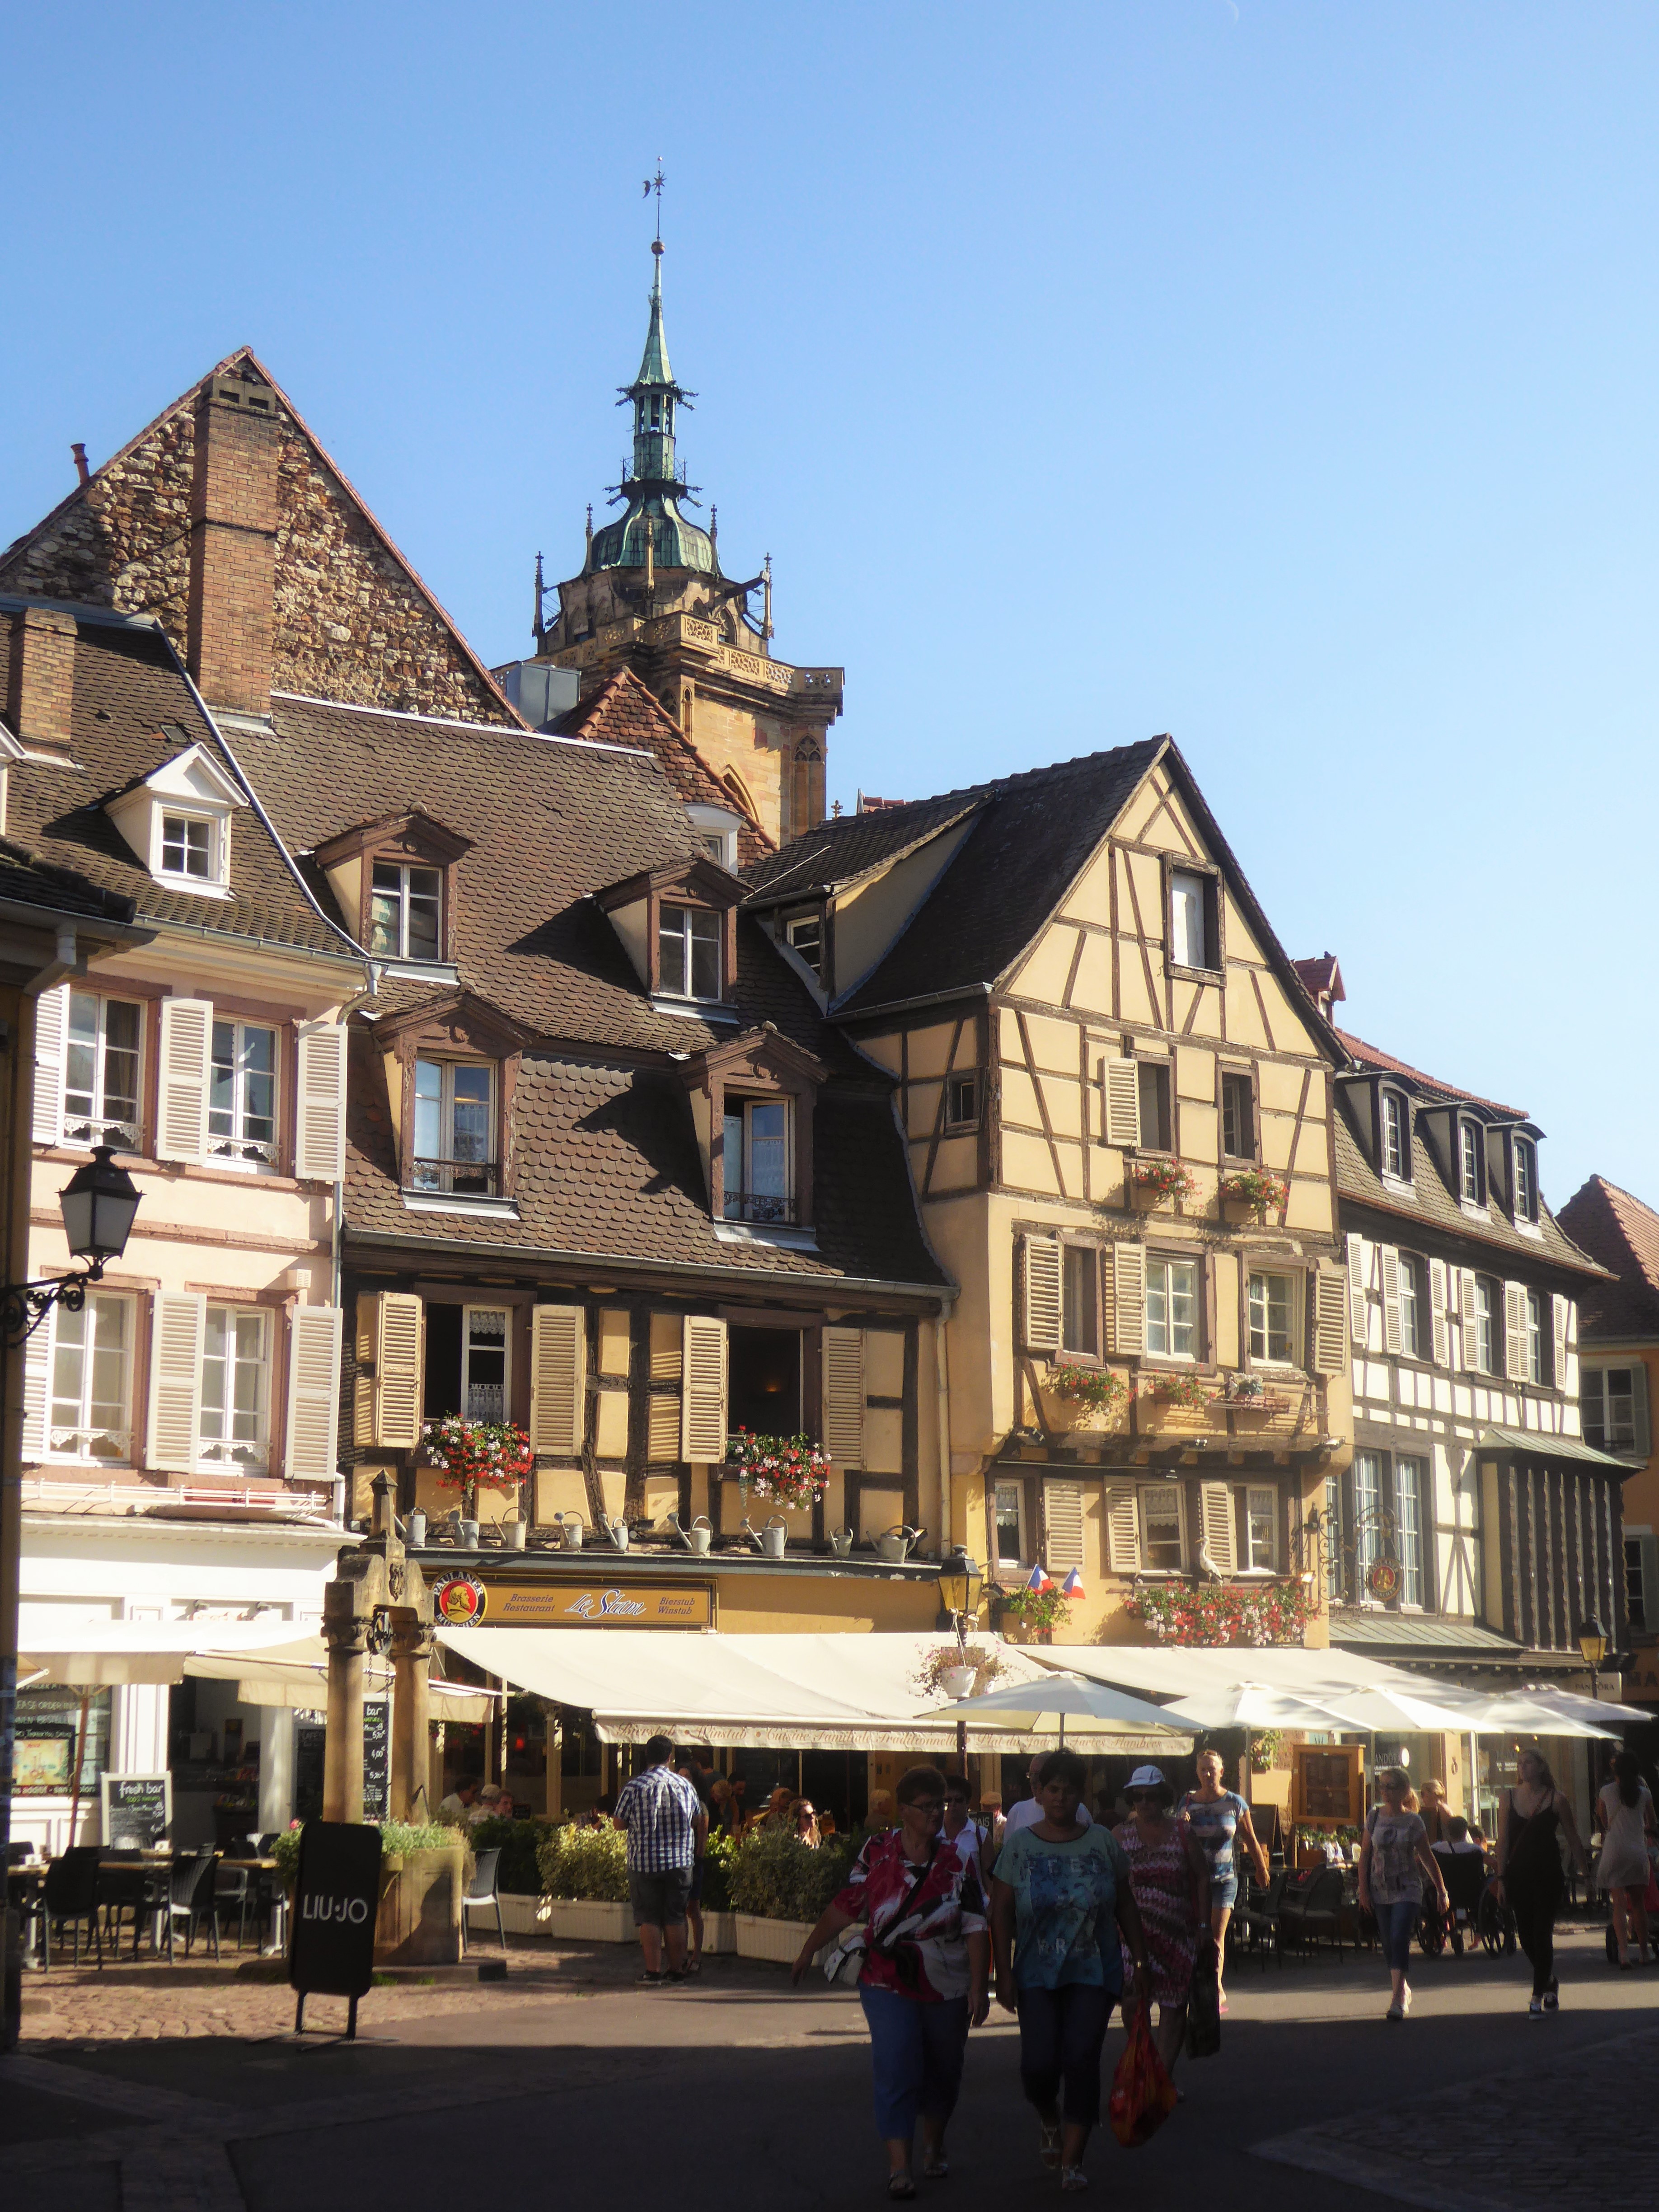 Alsace is one of the most cycling-friendly regions in France